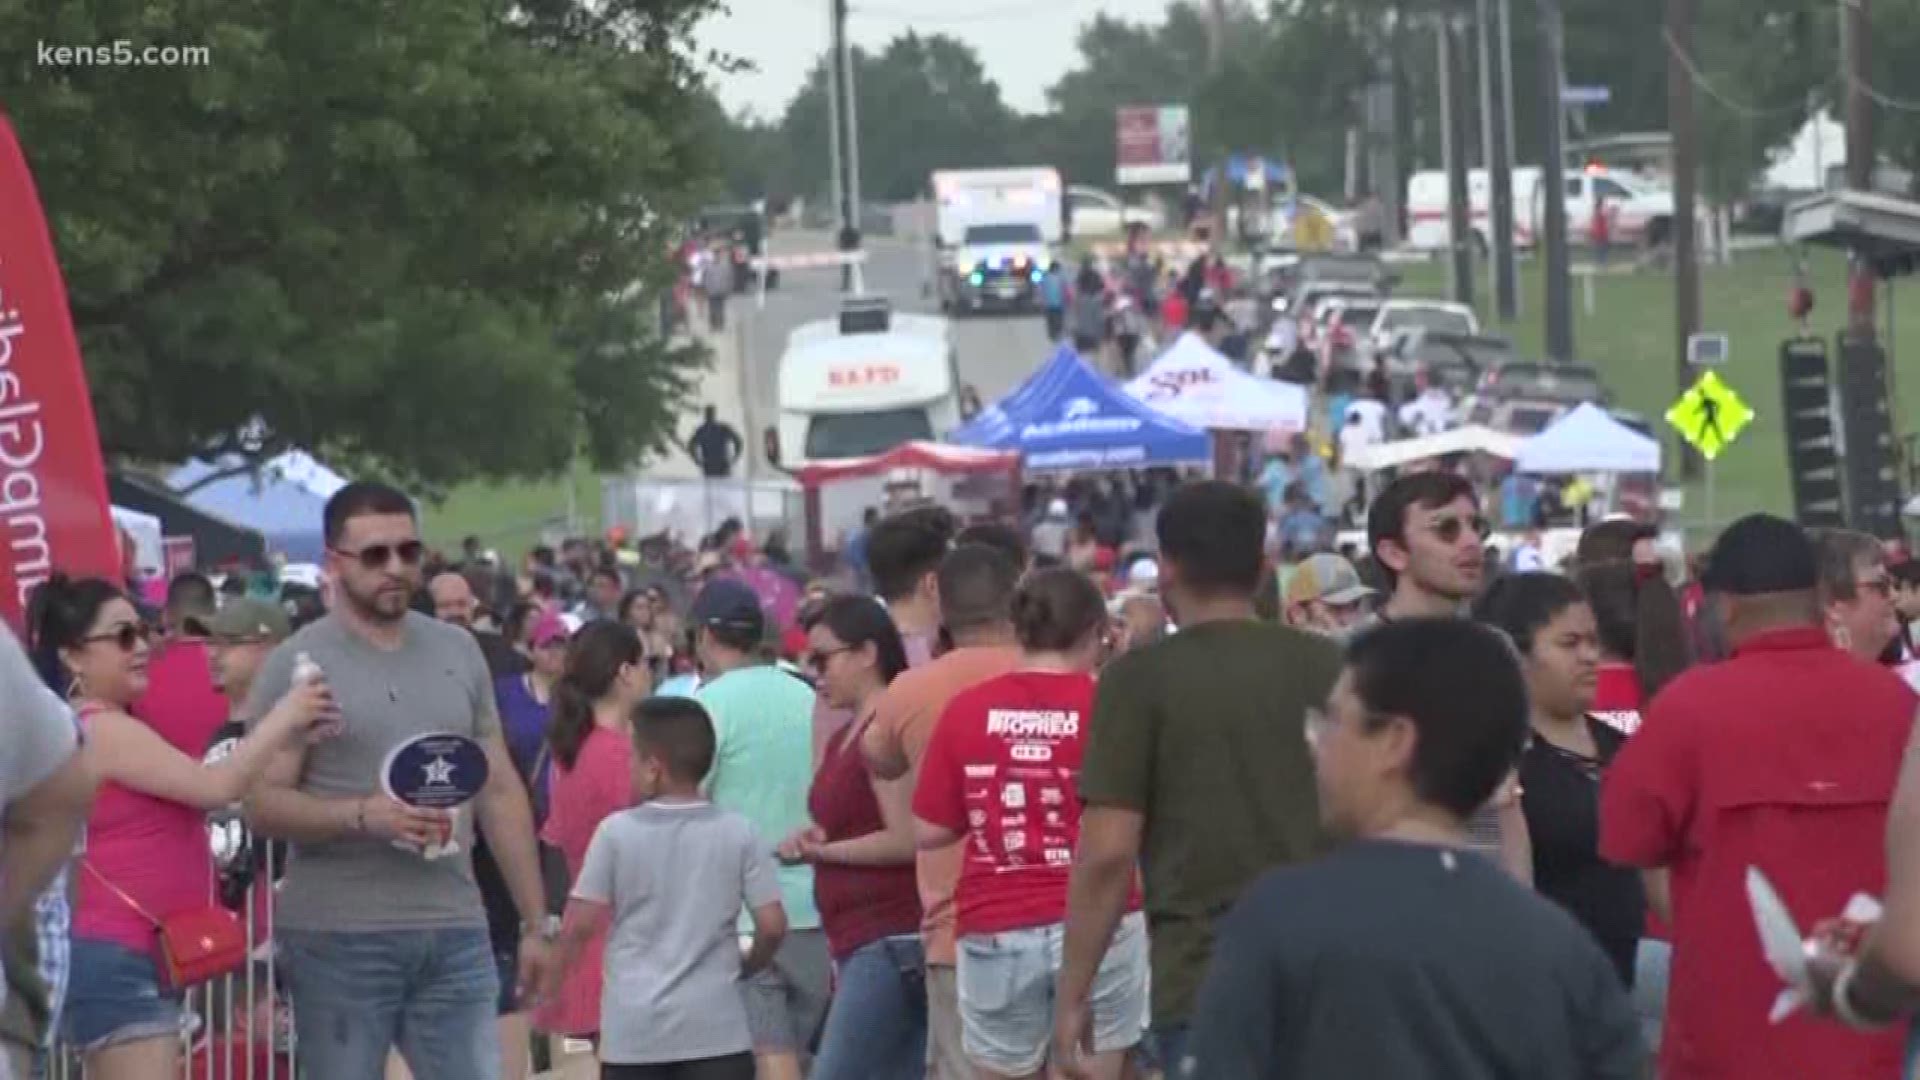 At least one person was taken to the hospital for heat exhaustion during Sunday’s Barbacoa & Big Red Festival on the south side, a spokesperson with the San Antonio Fire Department said.